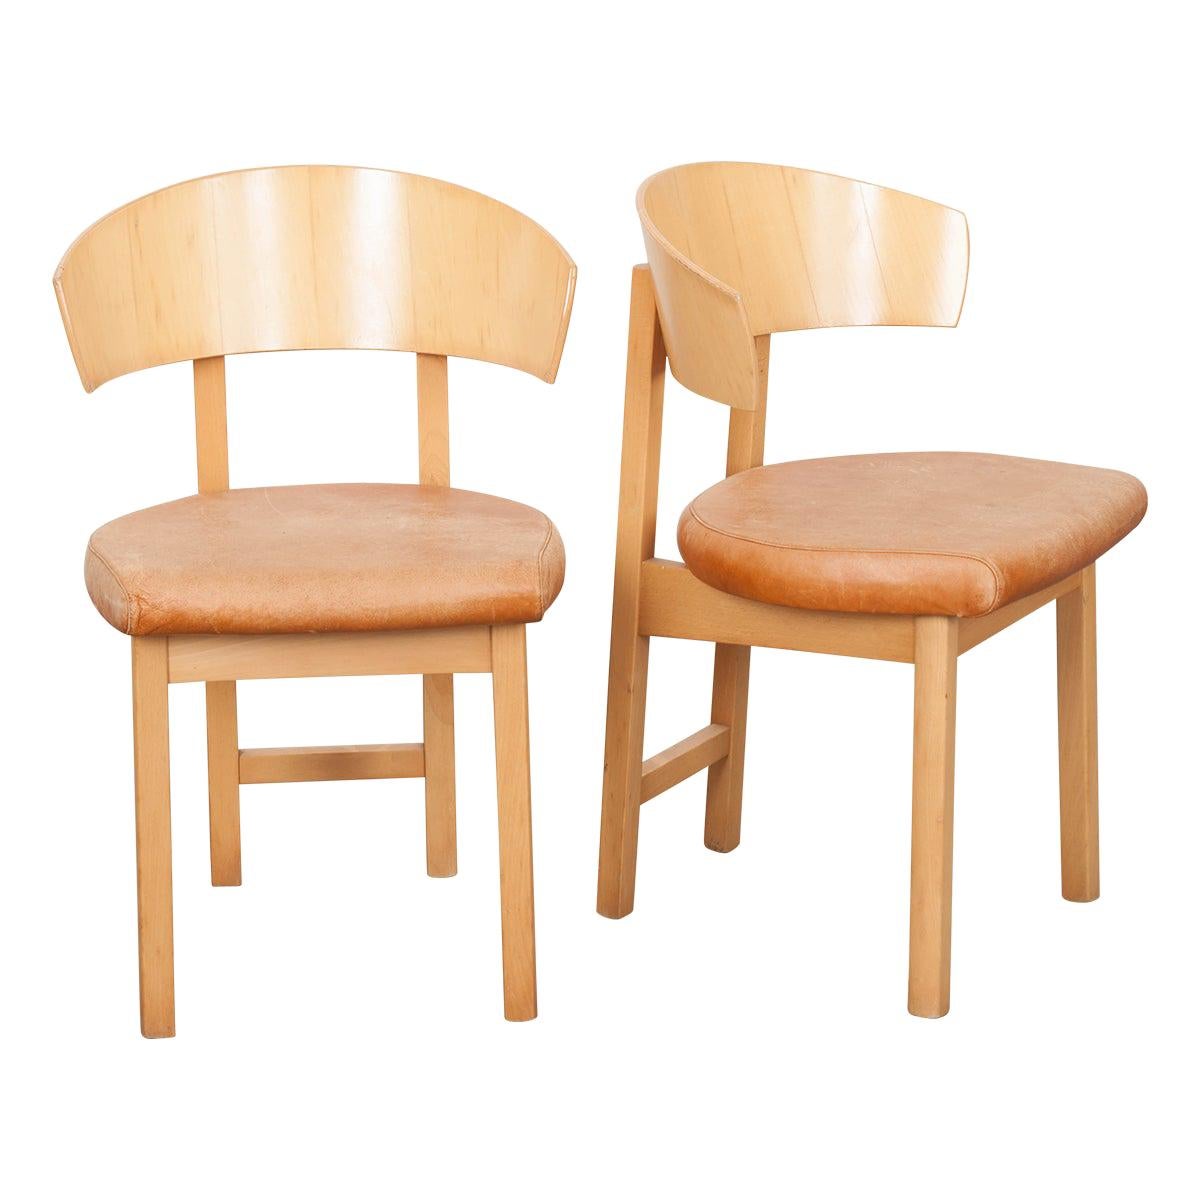 Pair of French Vintage Art Deco-Style Side Chairs